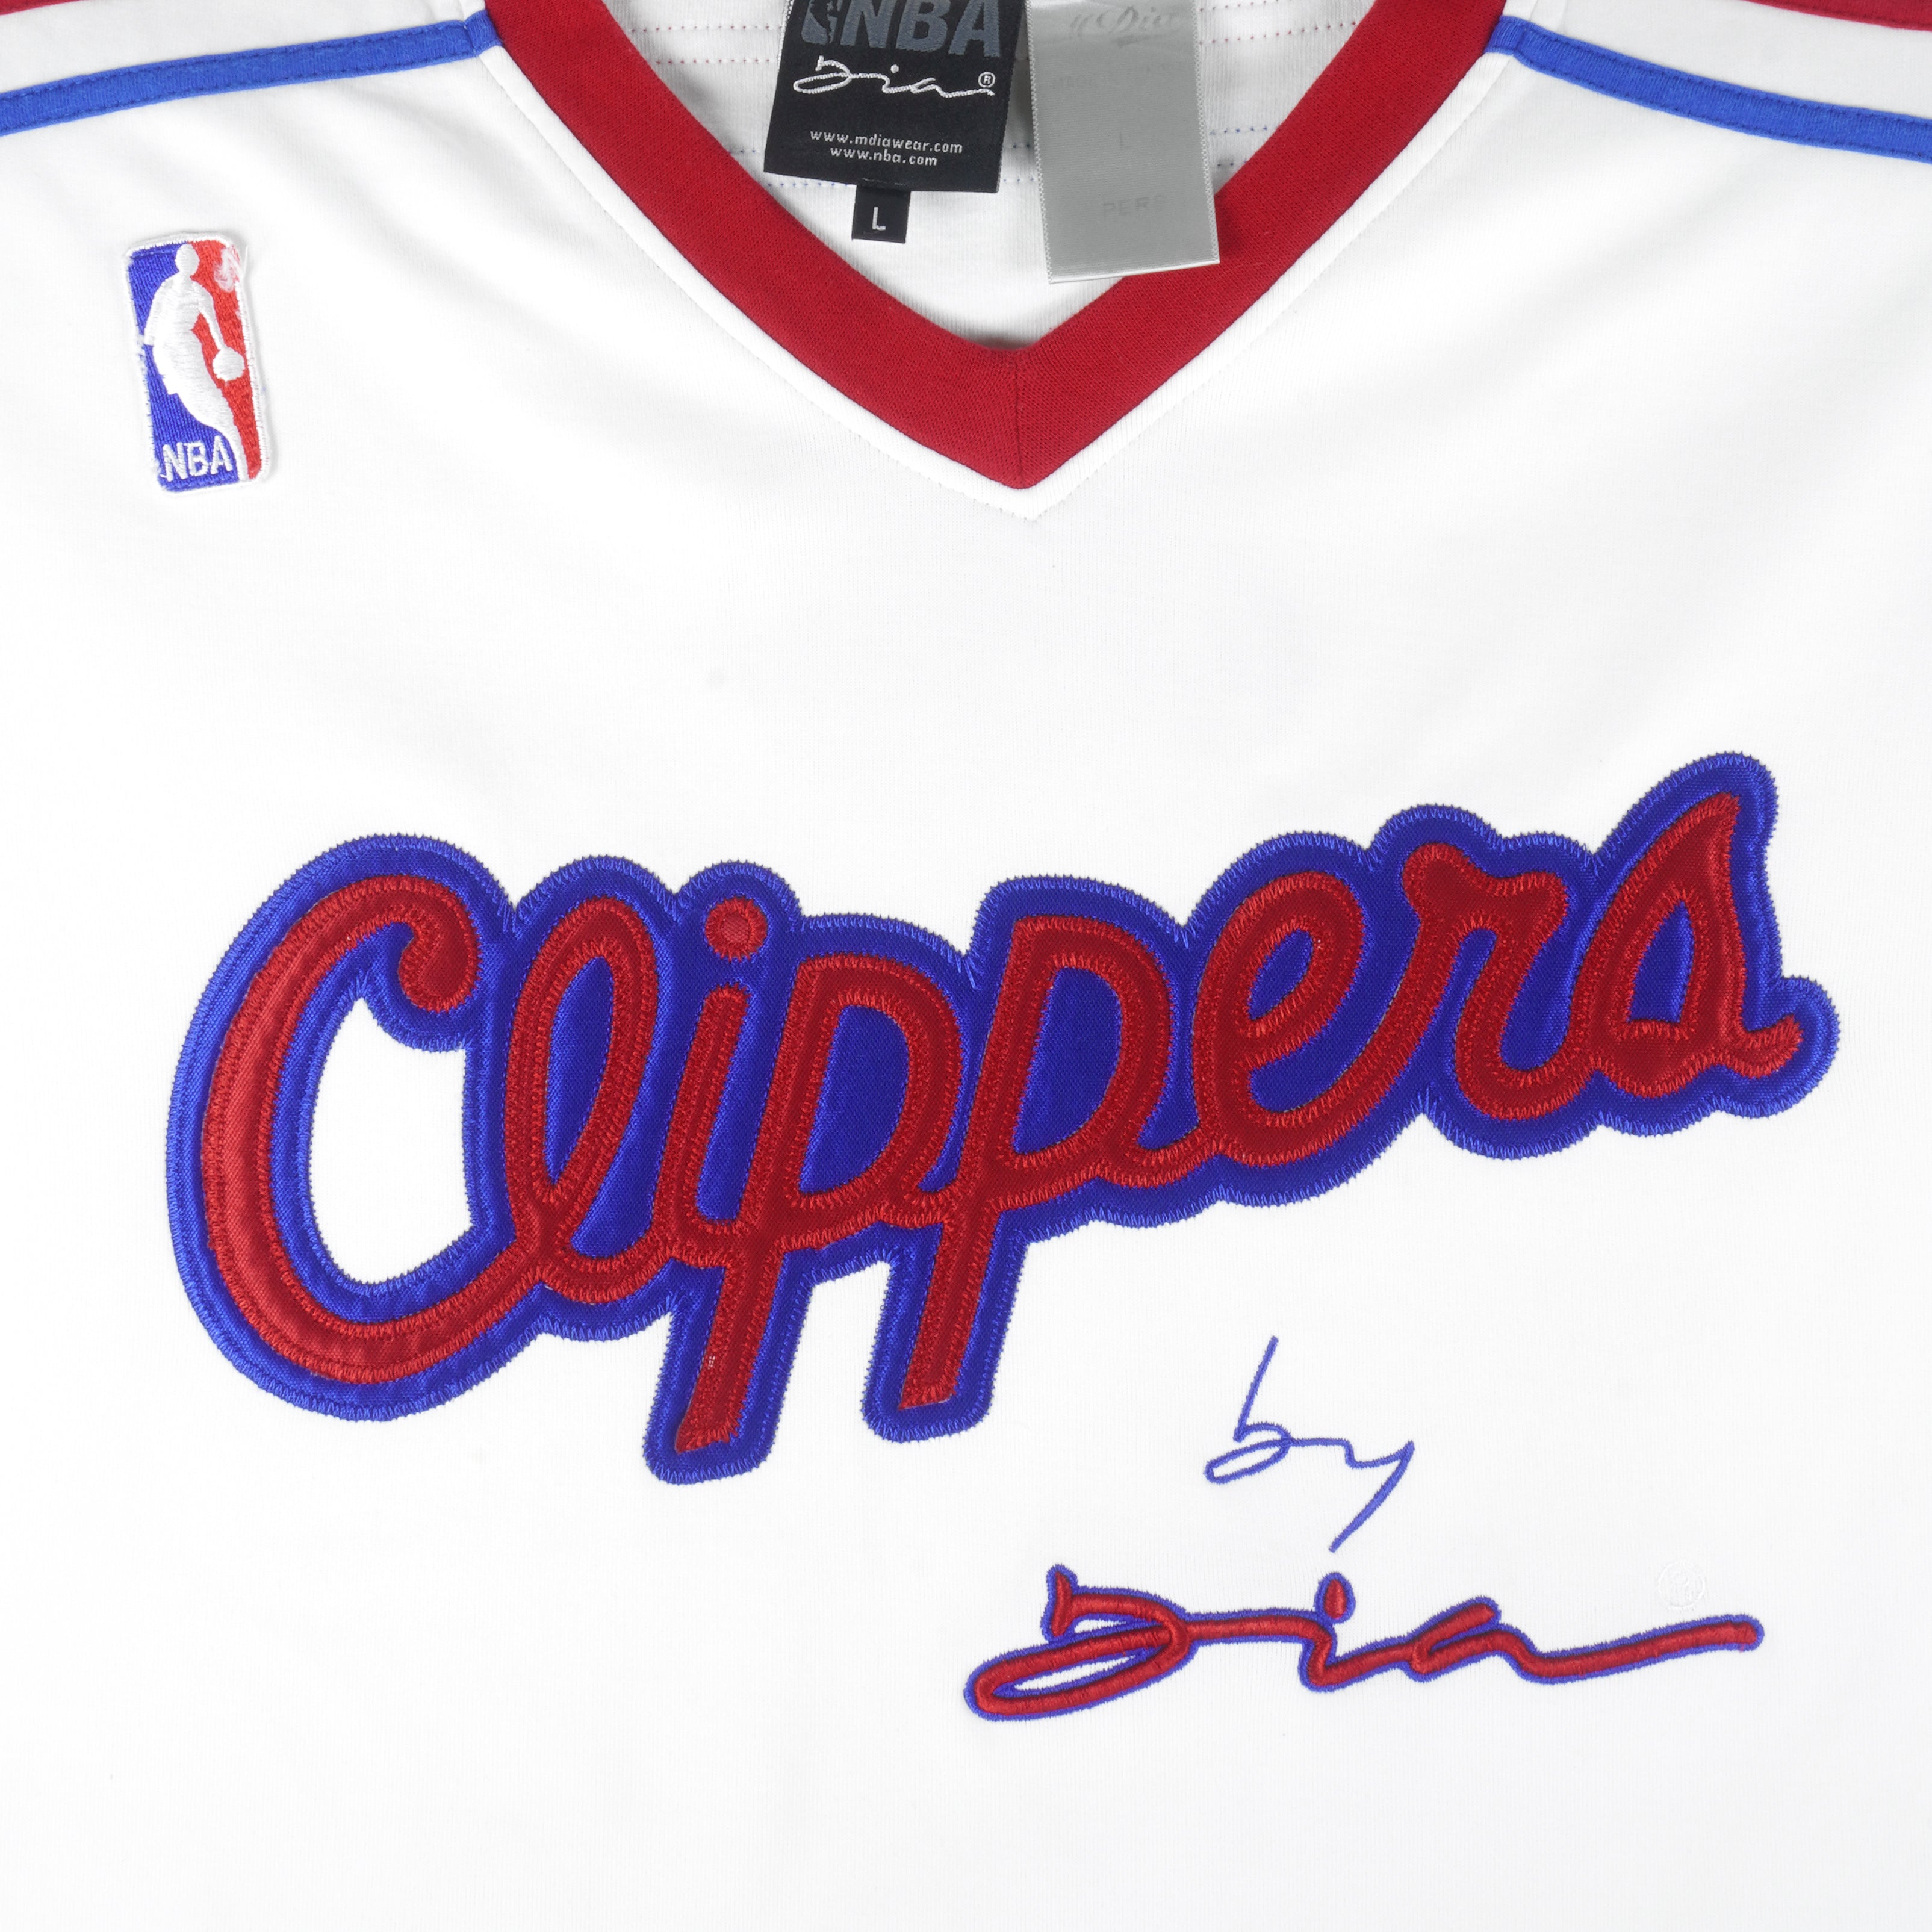 Los Angeles Clippers Shirts, Clippers T-Shirt, Tees